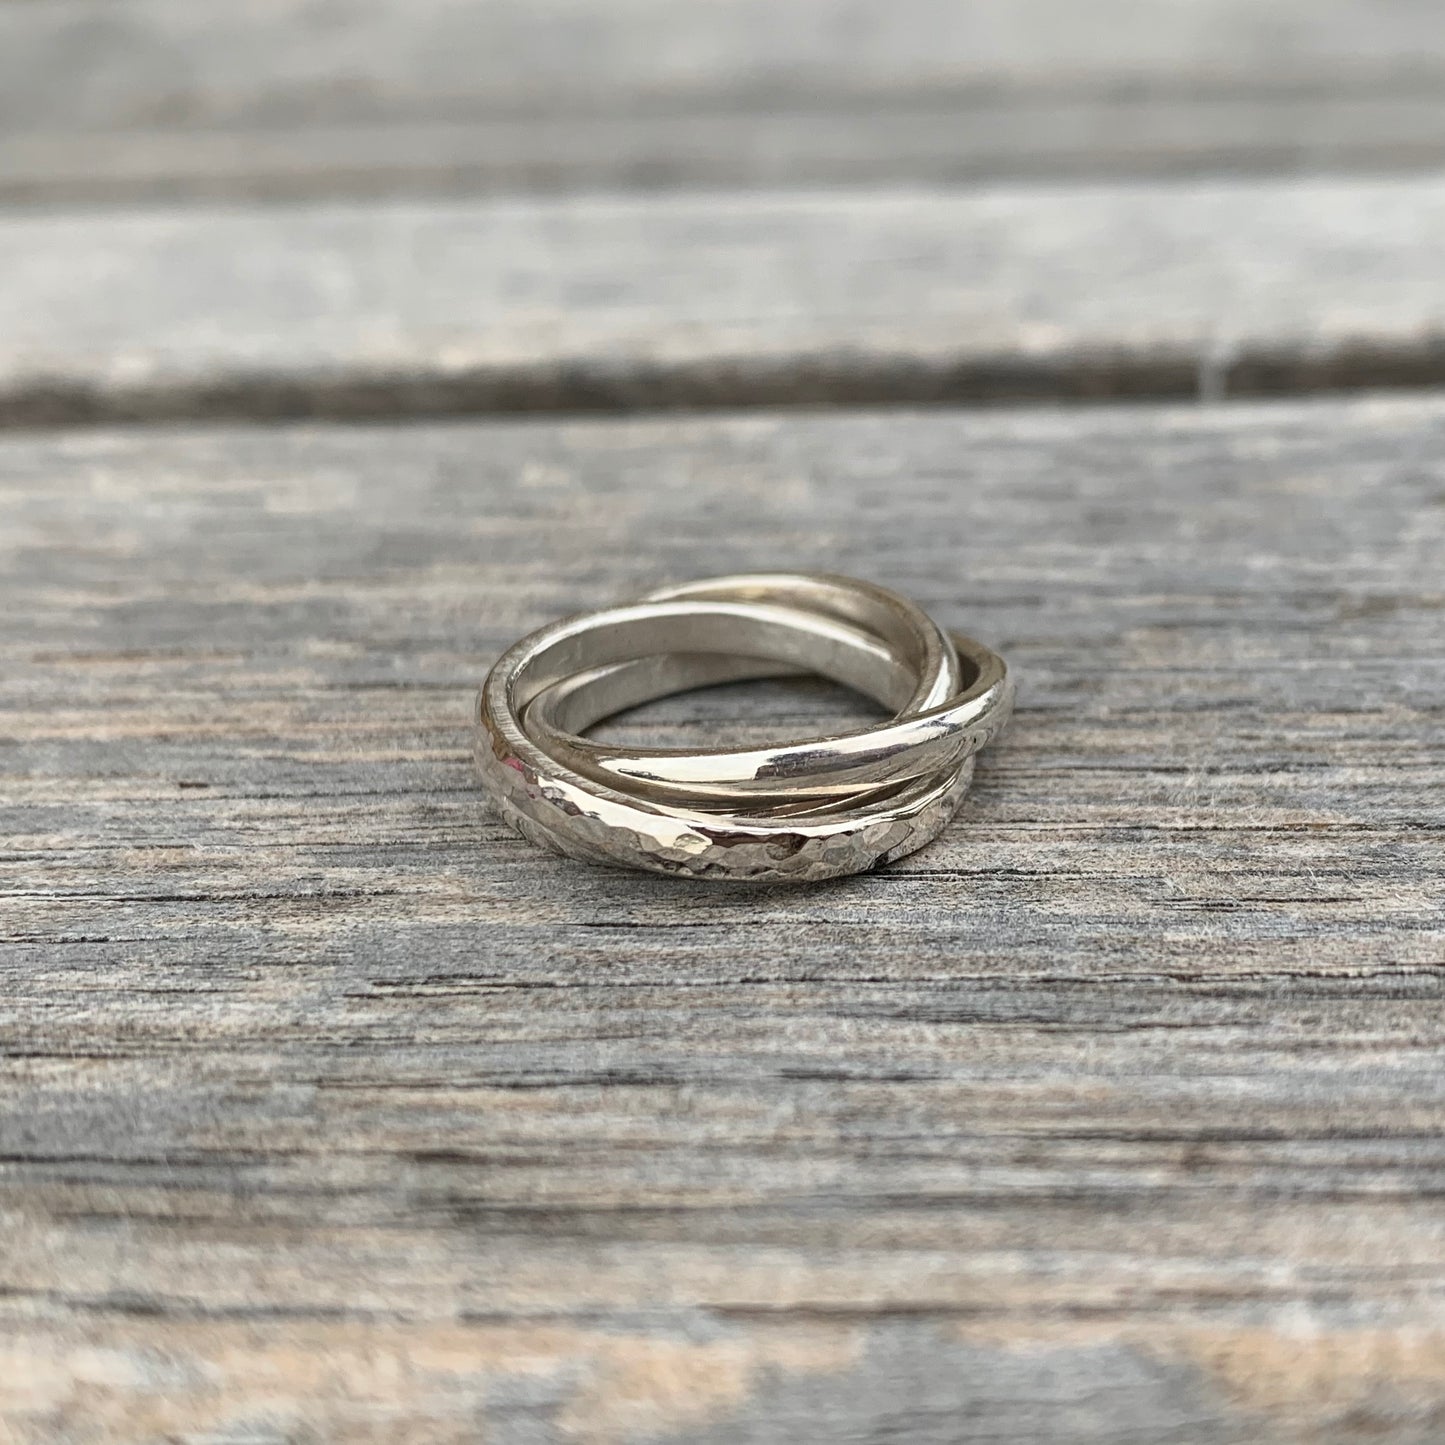 A sterling silver russian wedding ring with a hammered band.